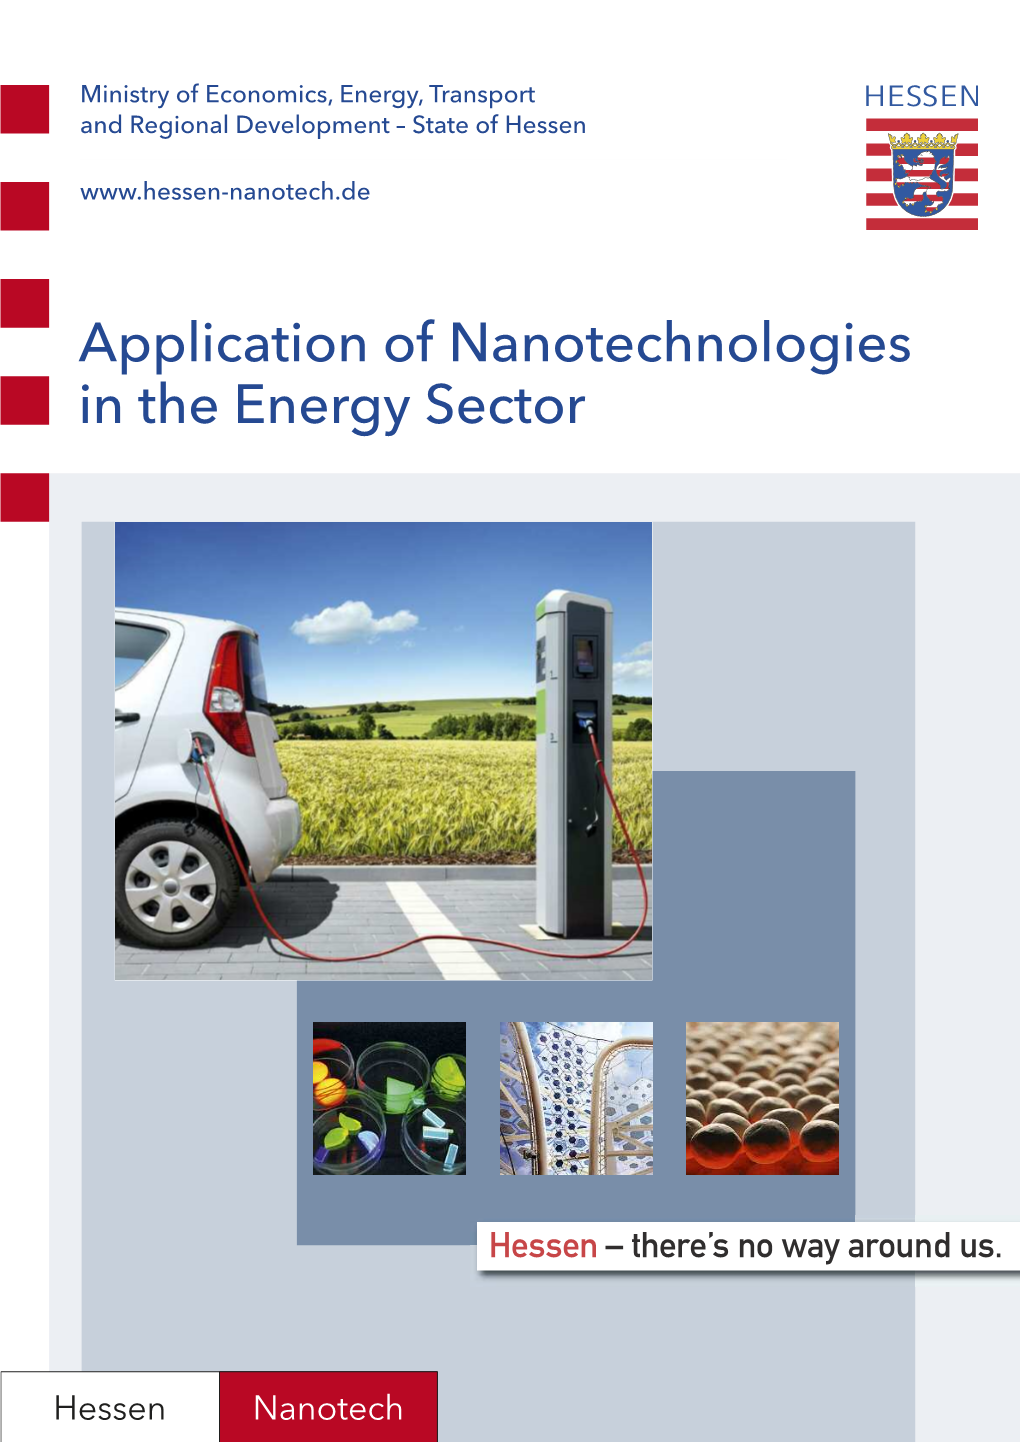 Application of Nanotechnologies in the Energy Sector